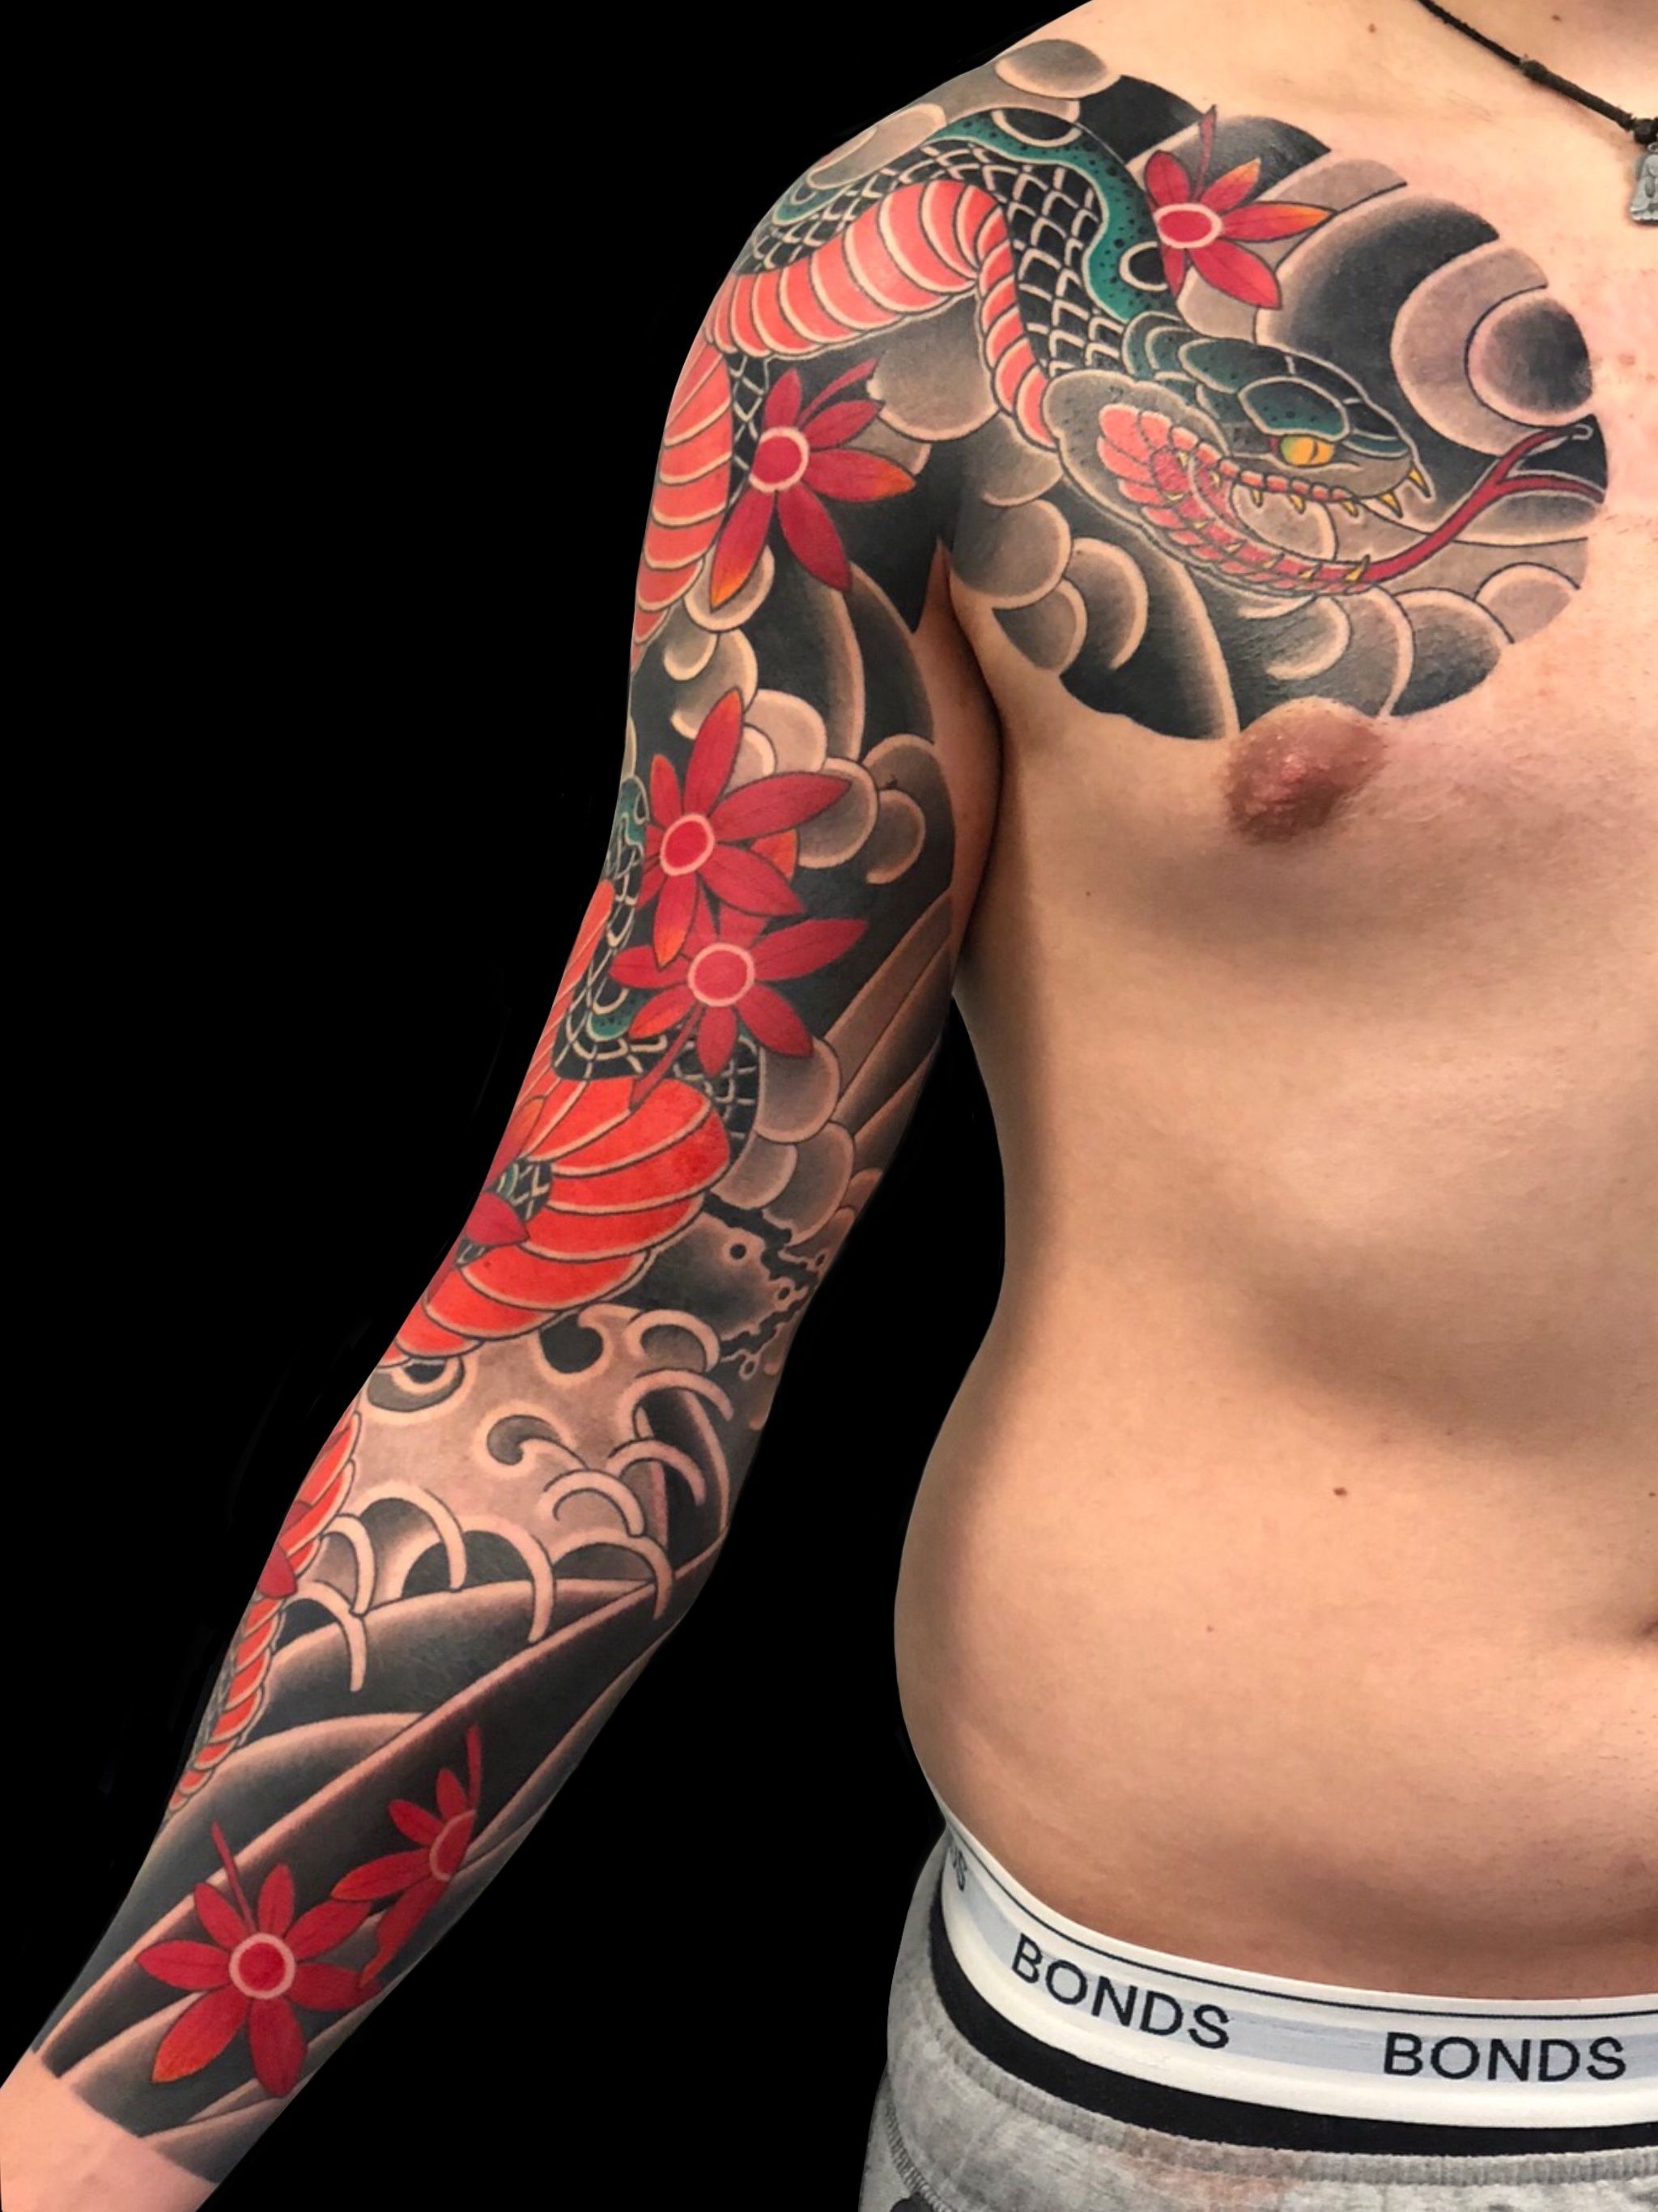 Top Tattoo Dealers in Chennai - Justdial